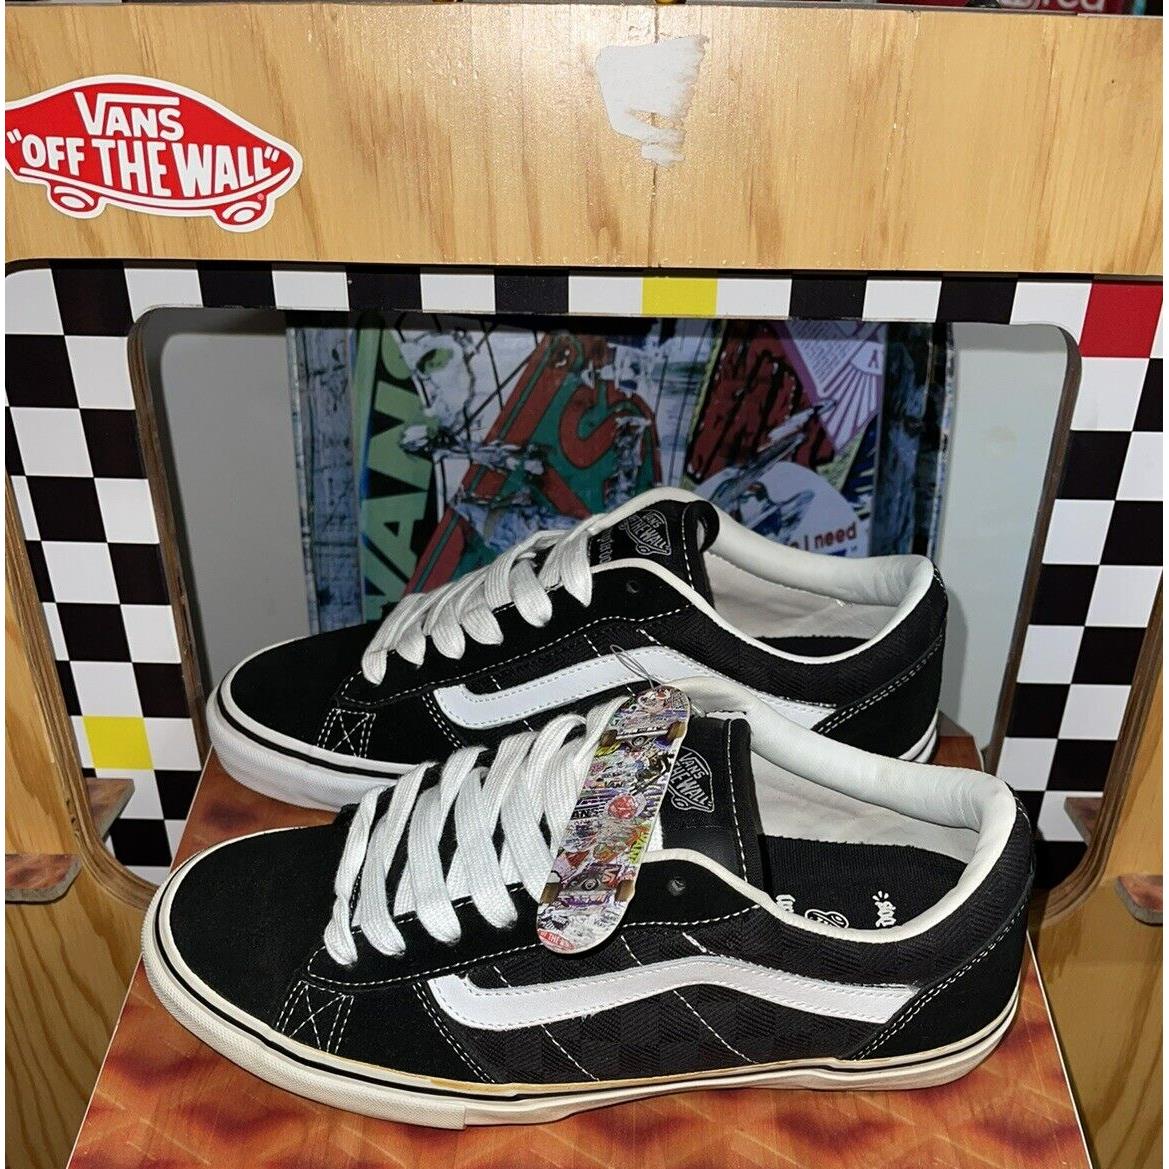 Vans shoes Off The Wall - Multicolor 0